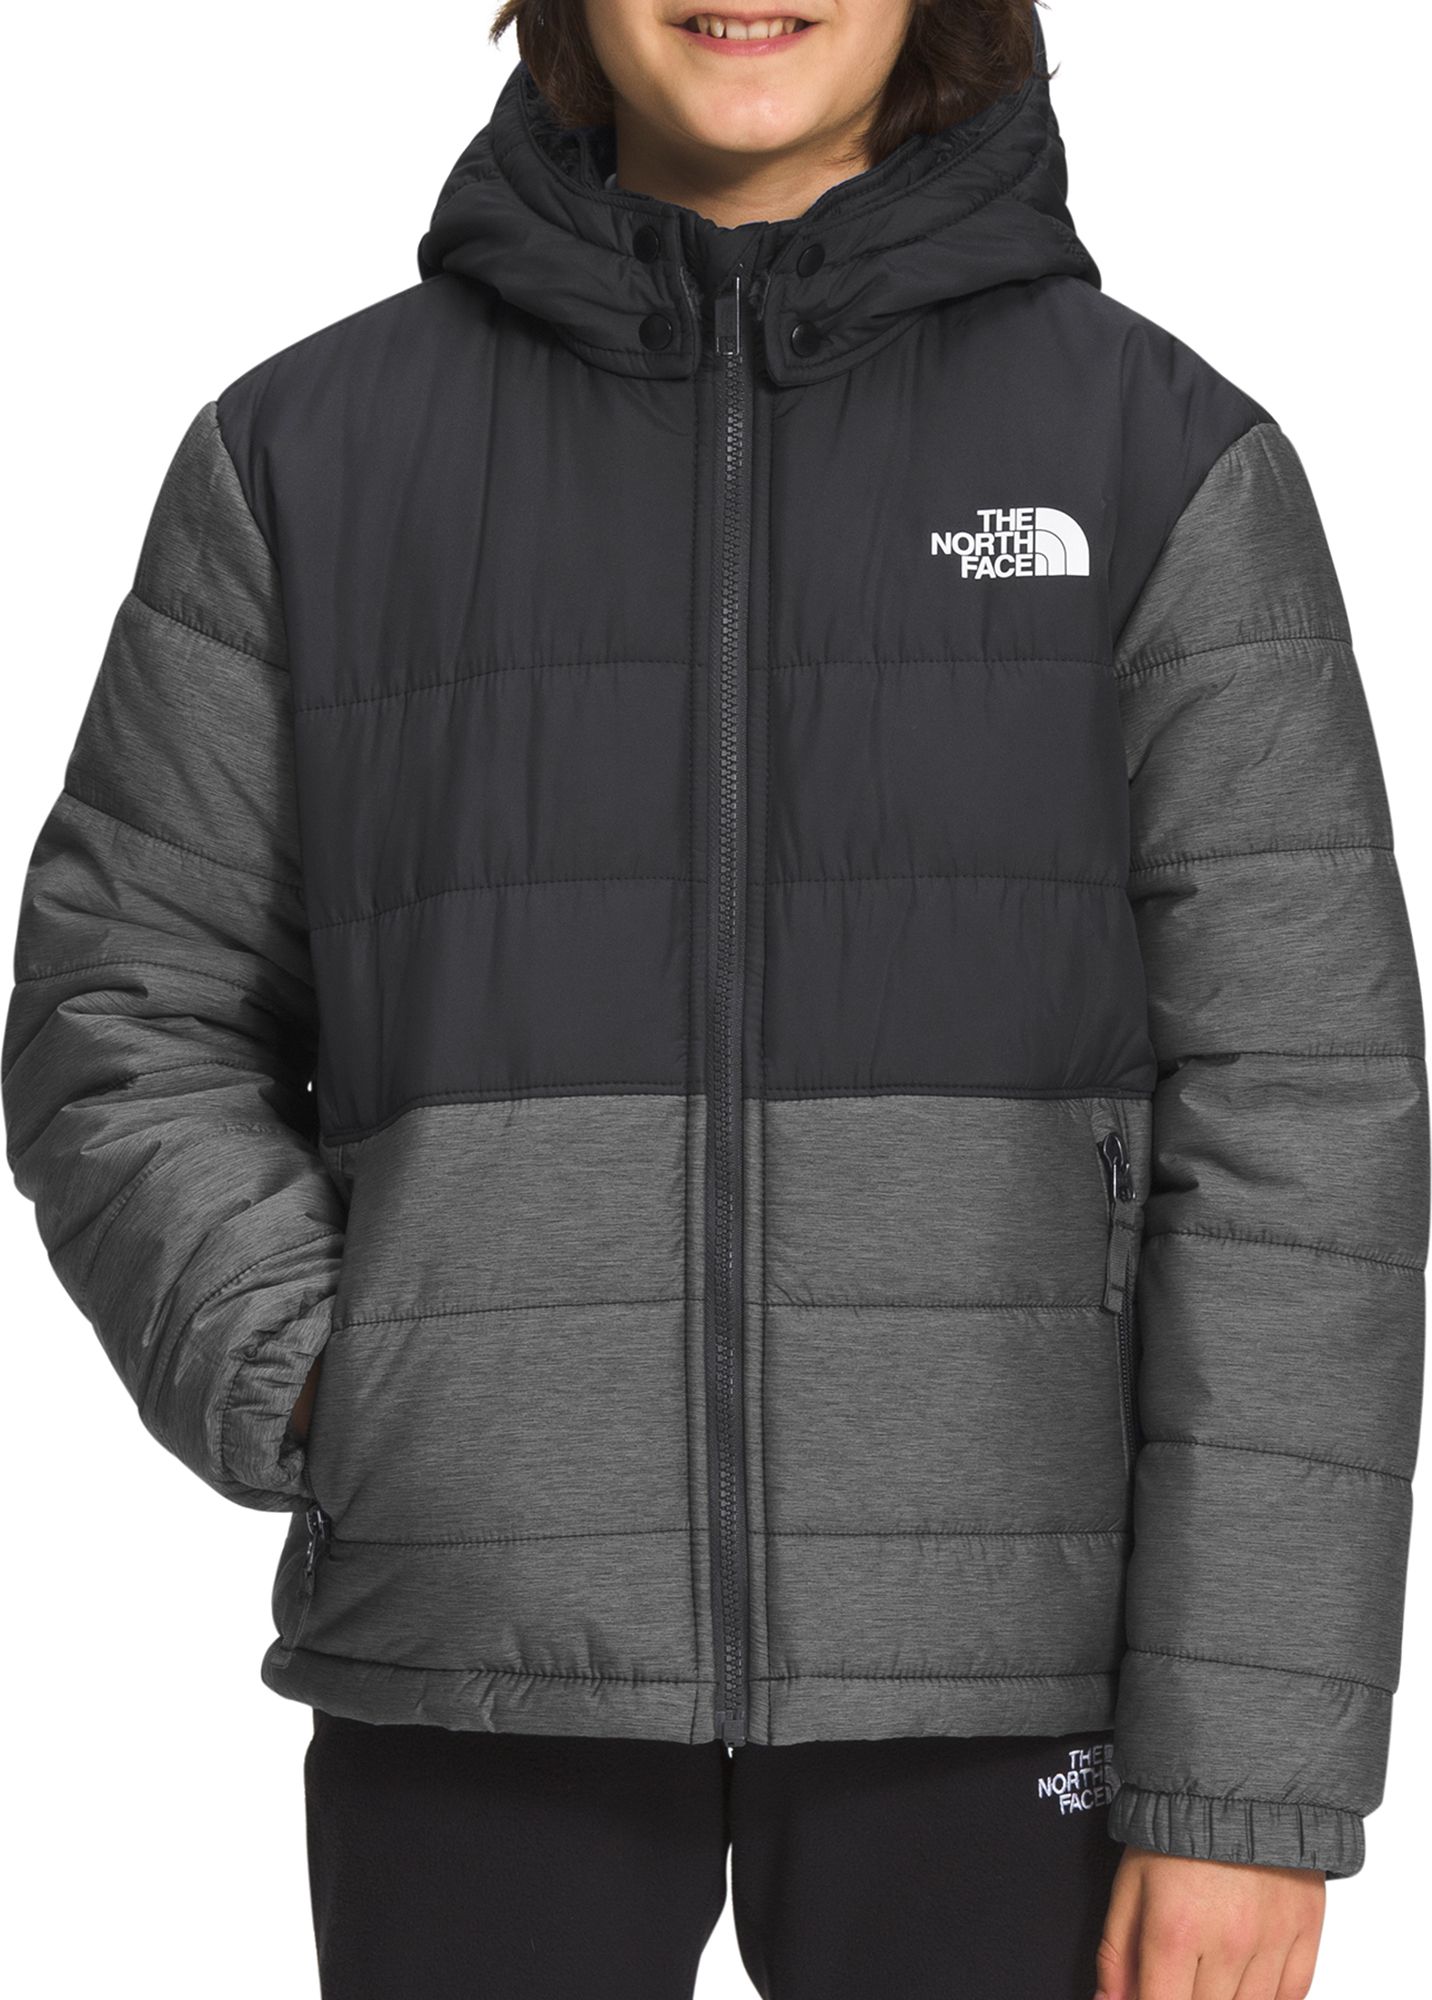 The North Face Boys Printed Reversible Mount Chimbo Jacket